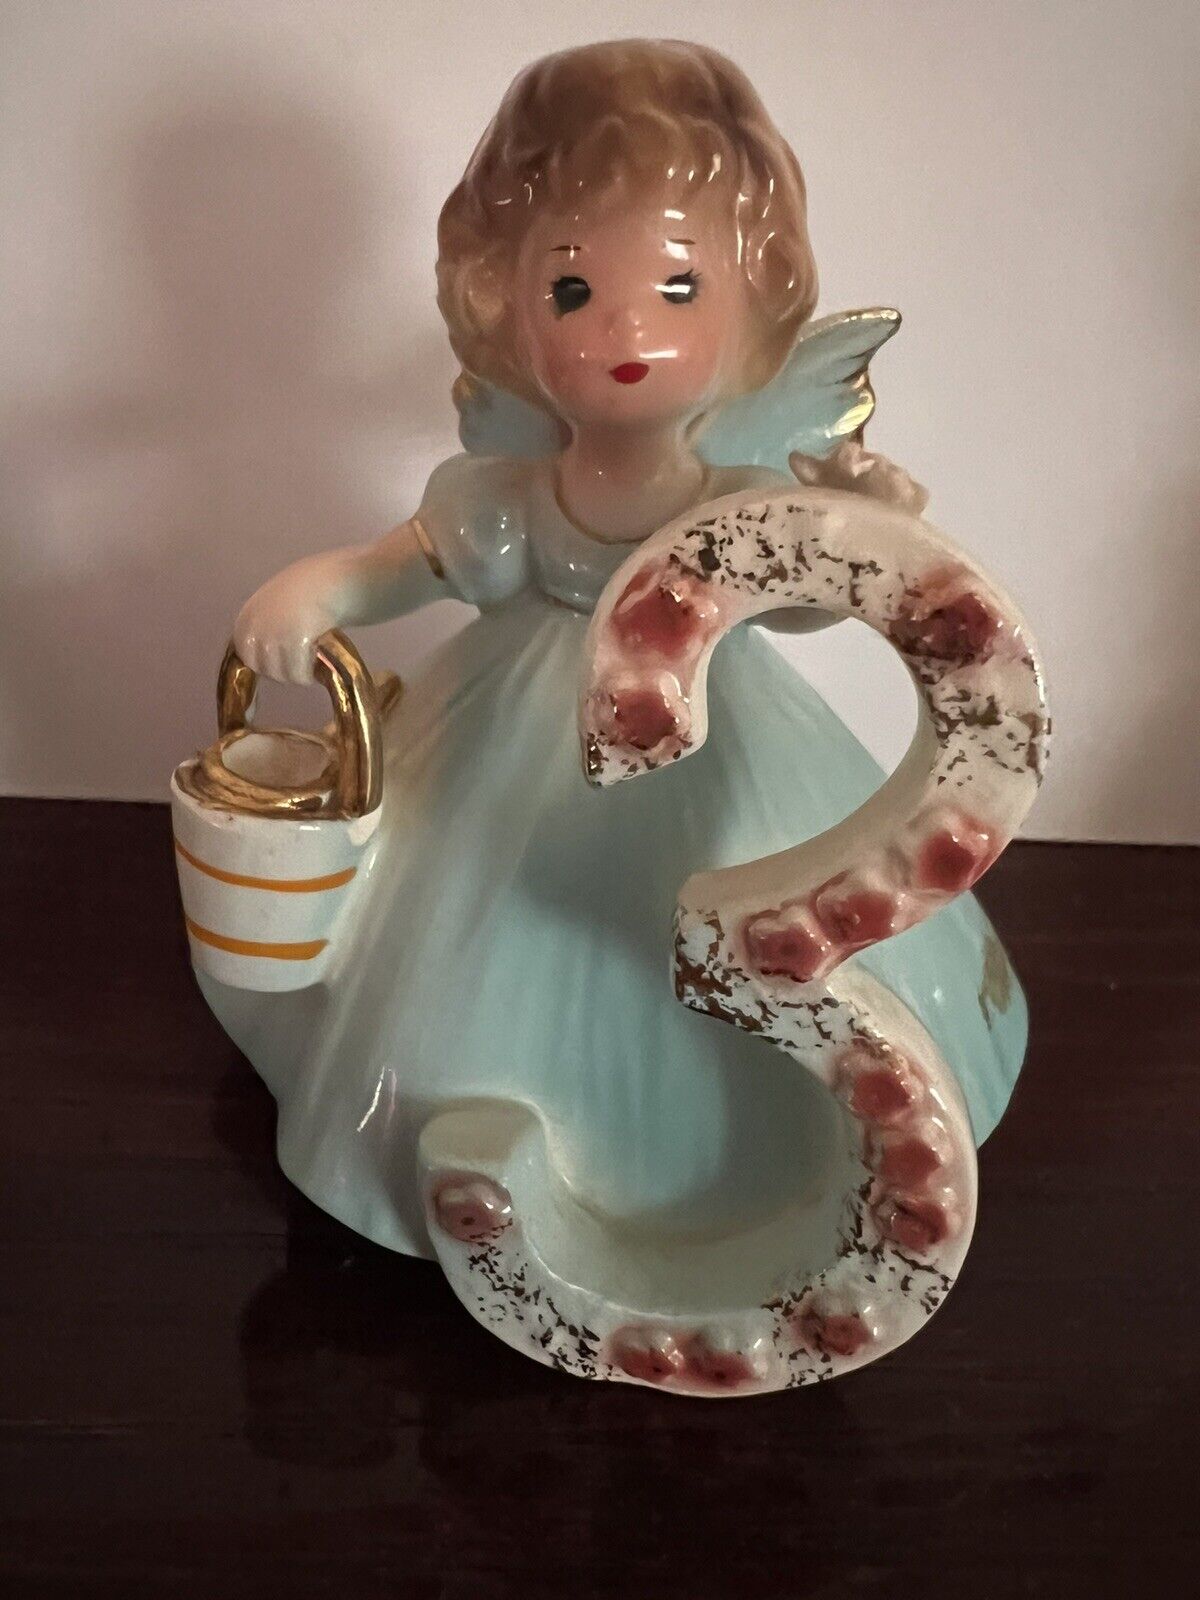 ✨Birthday Girl Figurines✨Age 3✨3.25✨Angel With Wings And Basket ✨Handpainted